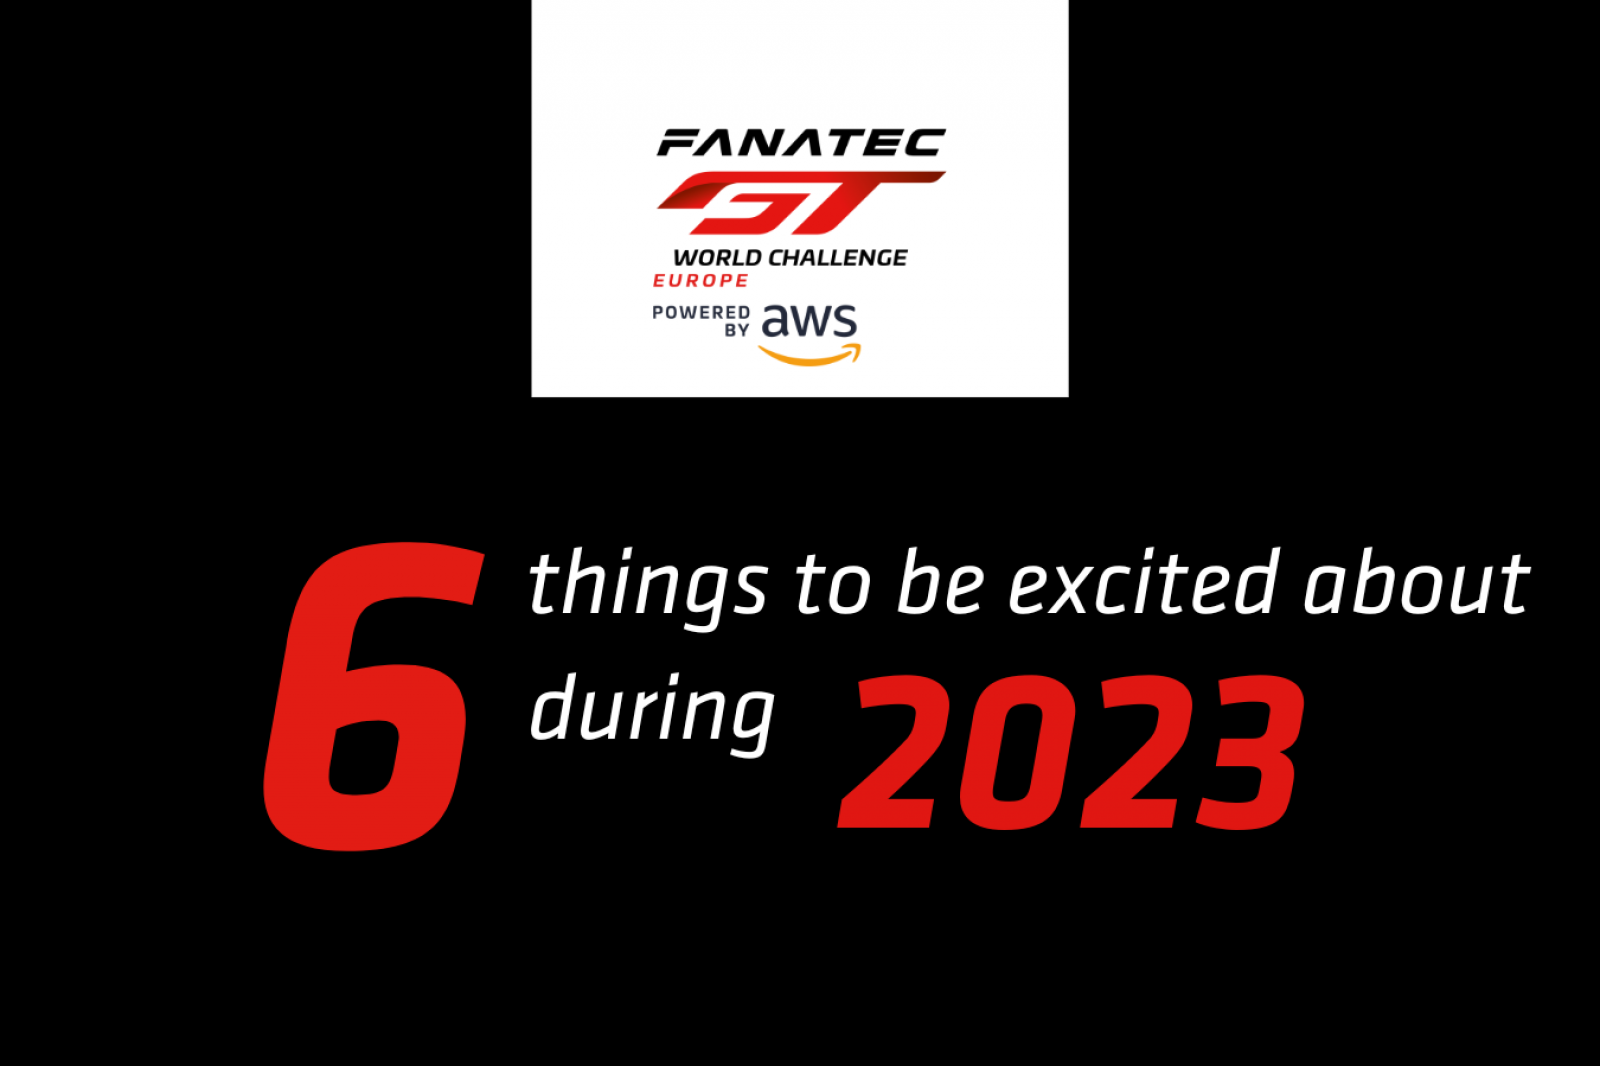 Six things to be excited about during the 2023 Fanatec GT Europe season